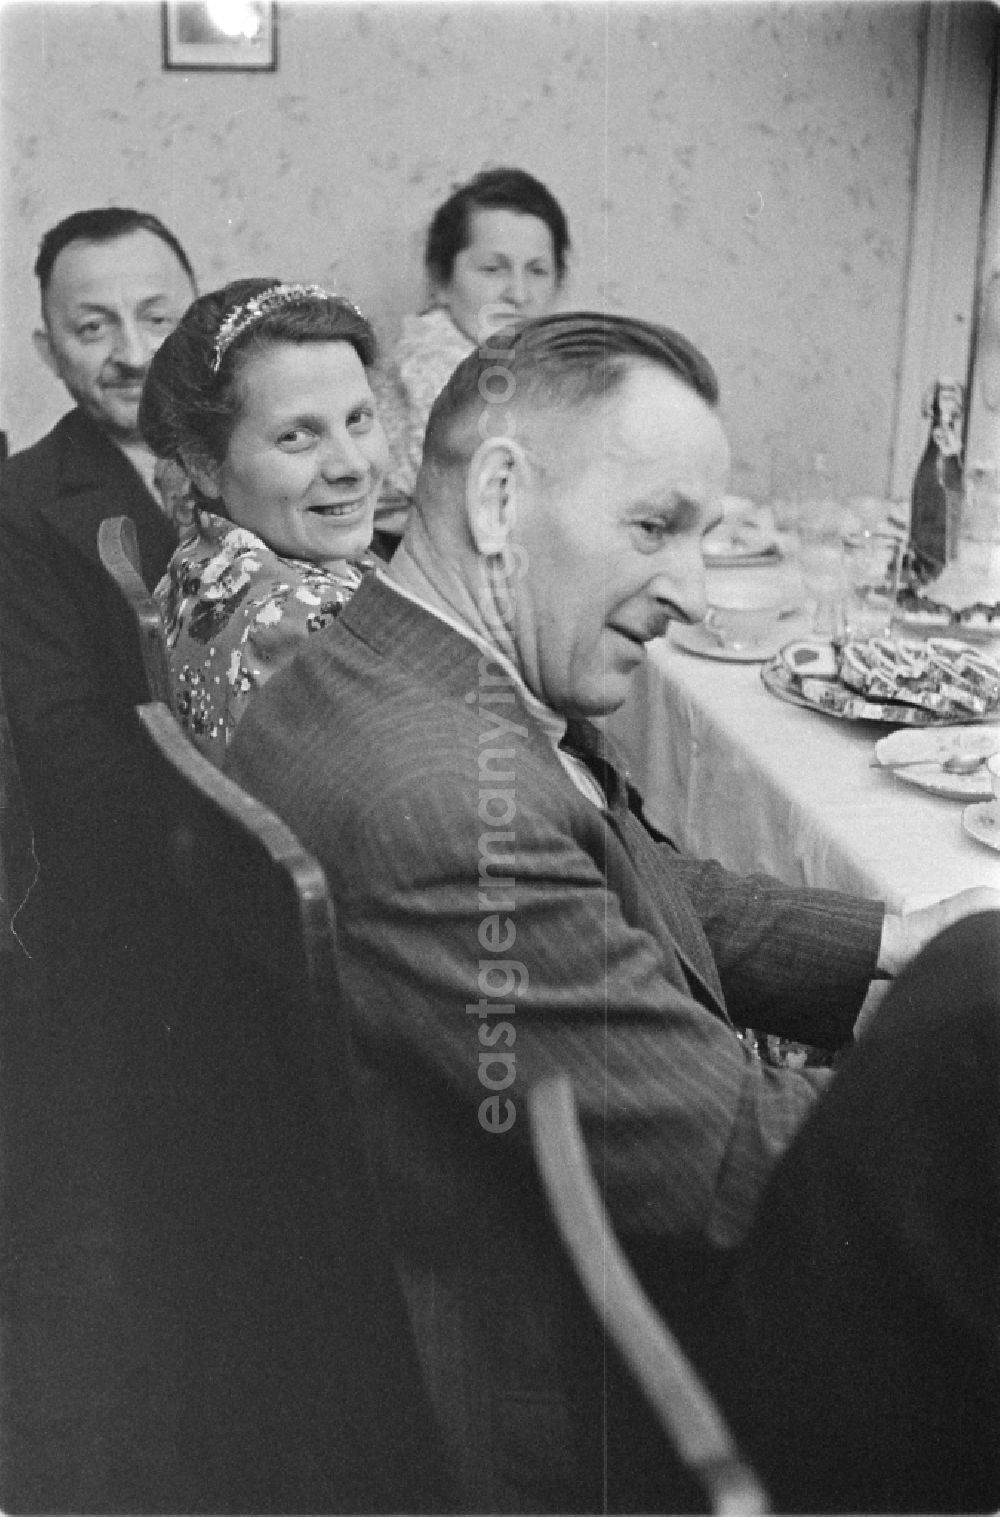 GDR image archive: Halberstadt - Members and friends on the occasion of a family celebration for the silver wedding in the Bergstrasse in Halberstadt in the state Saxony-Anhalt in the area of the former GDR, German Democratic Republic